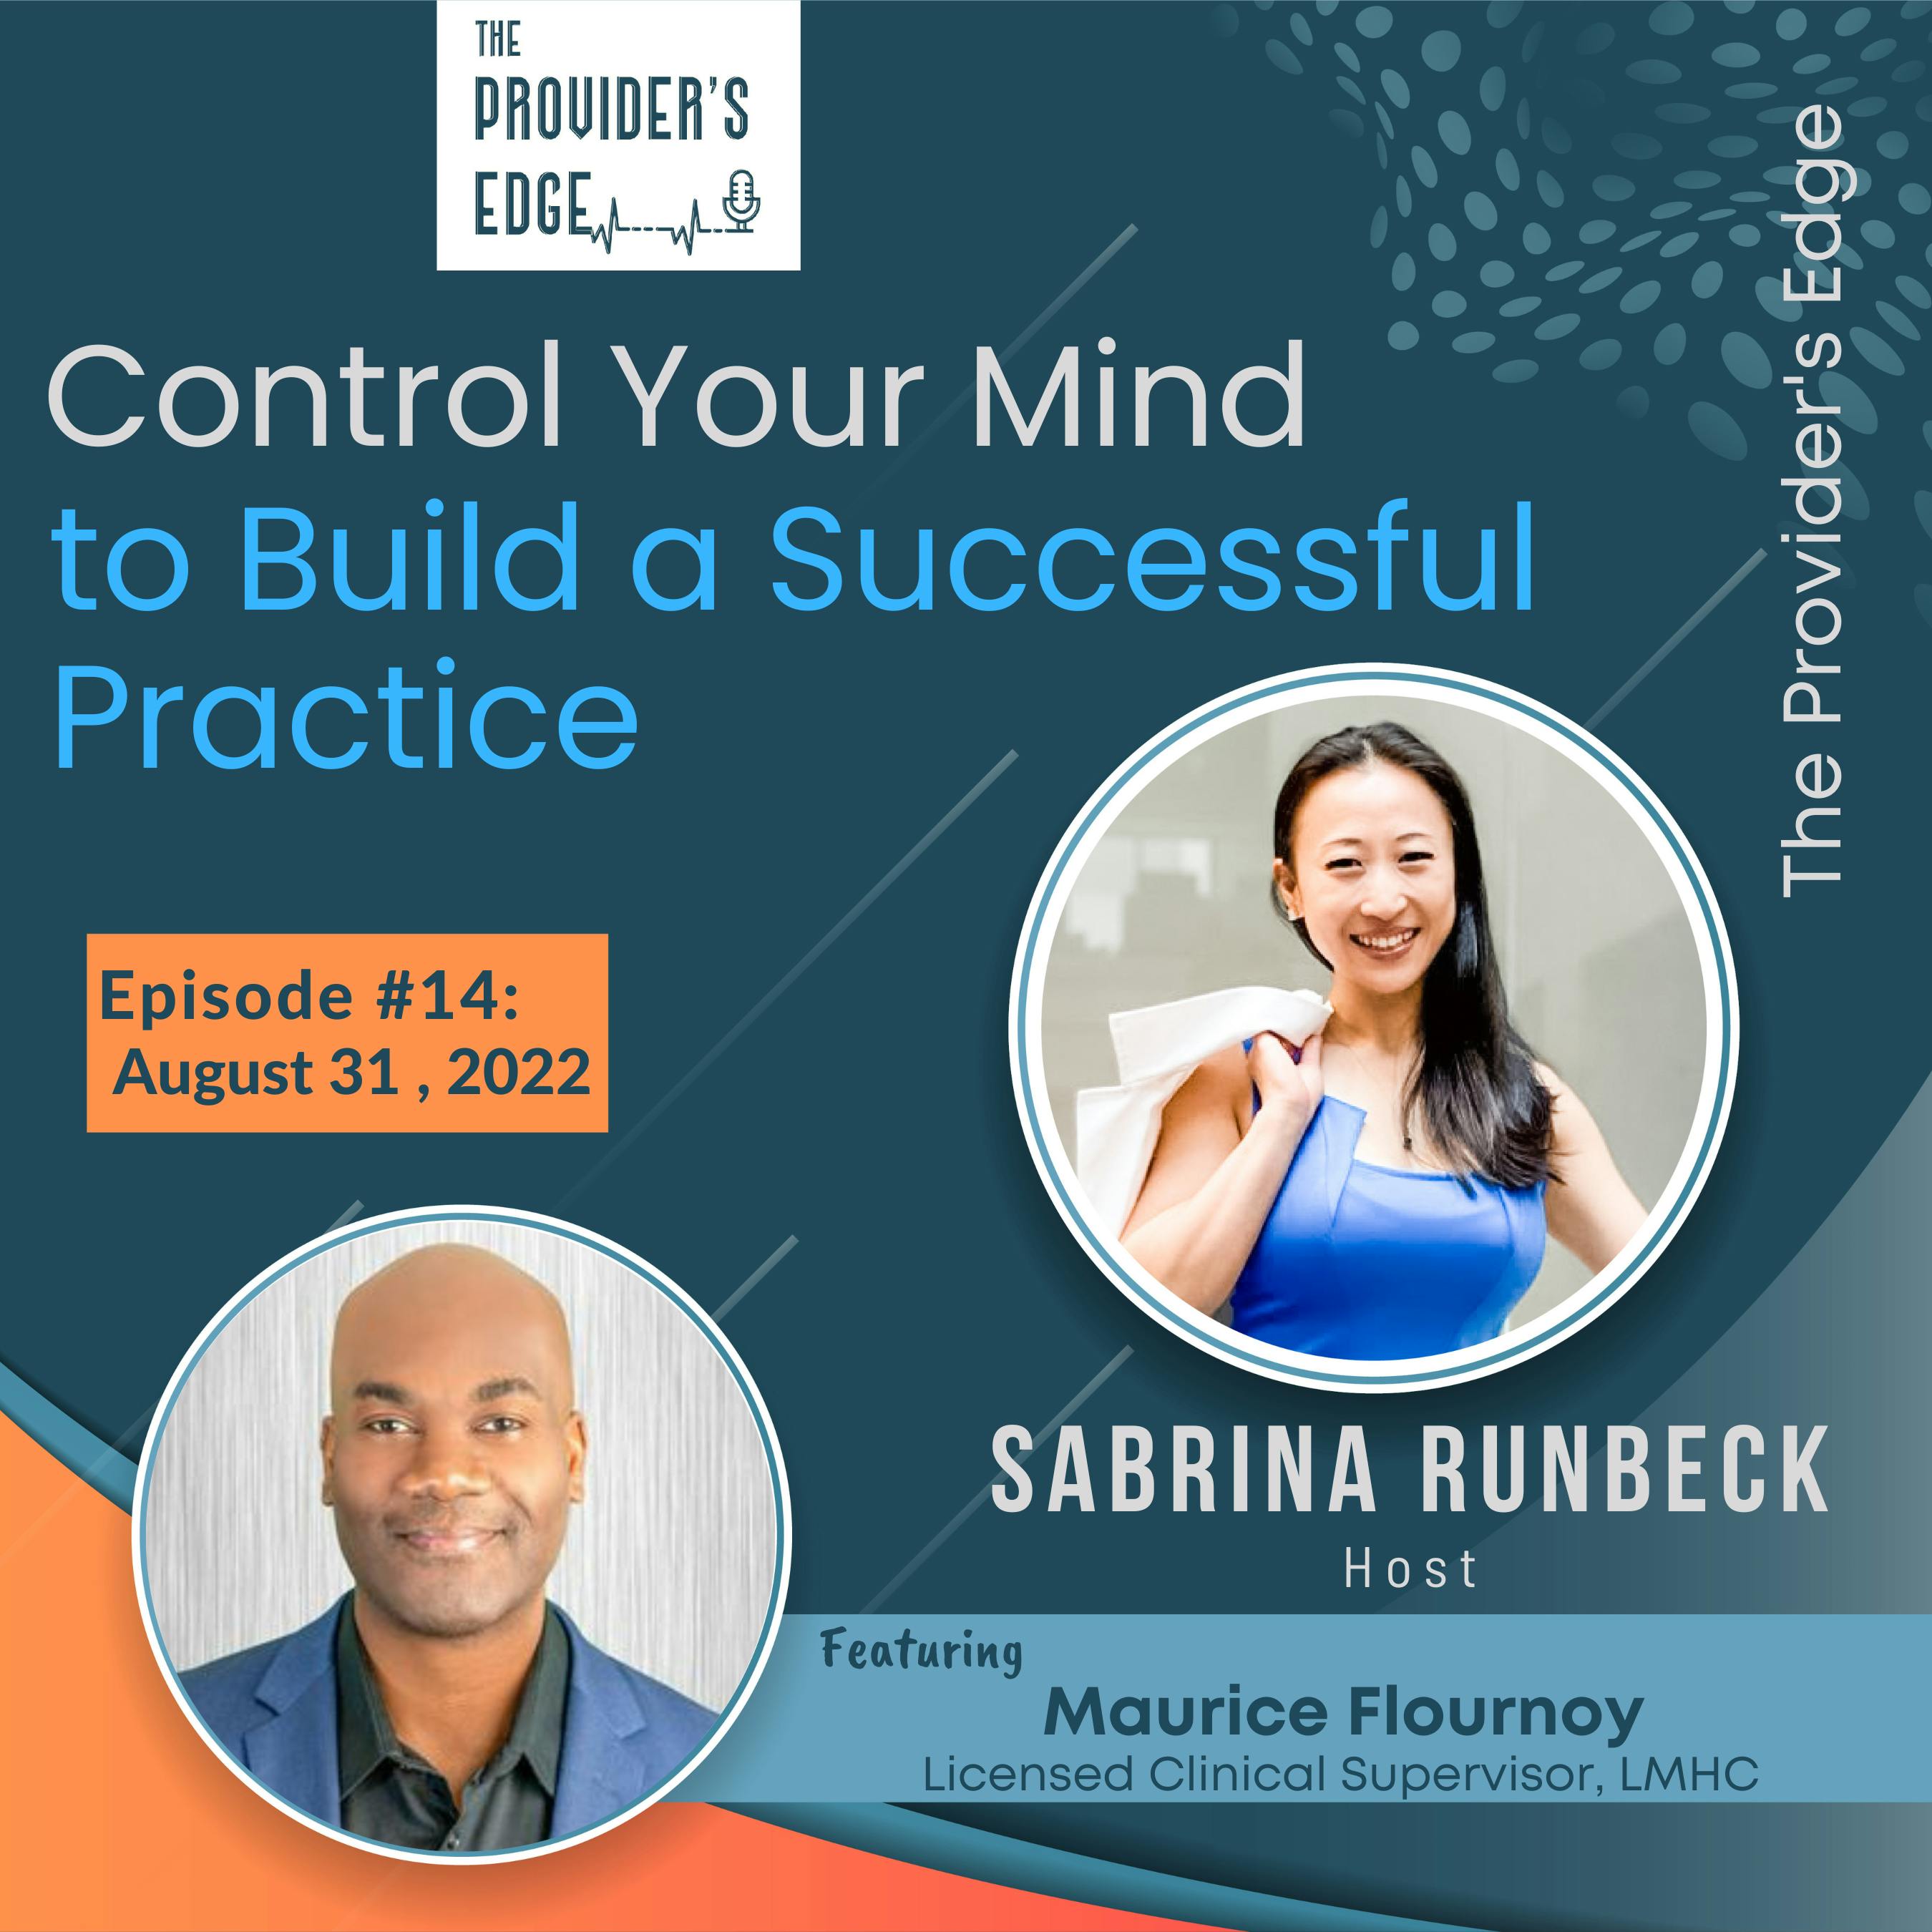 Take Control of Your Mind to Build a Successful Practice with Maurice Flournoy Ep 14